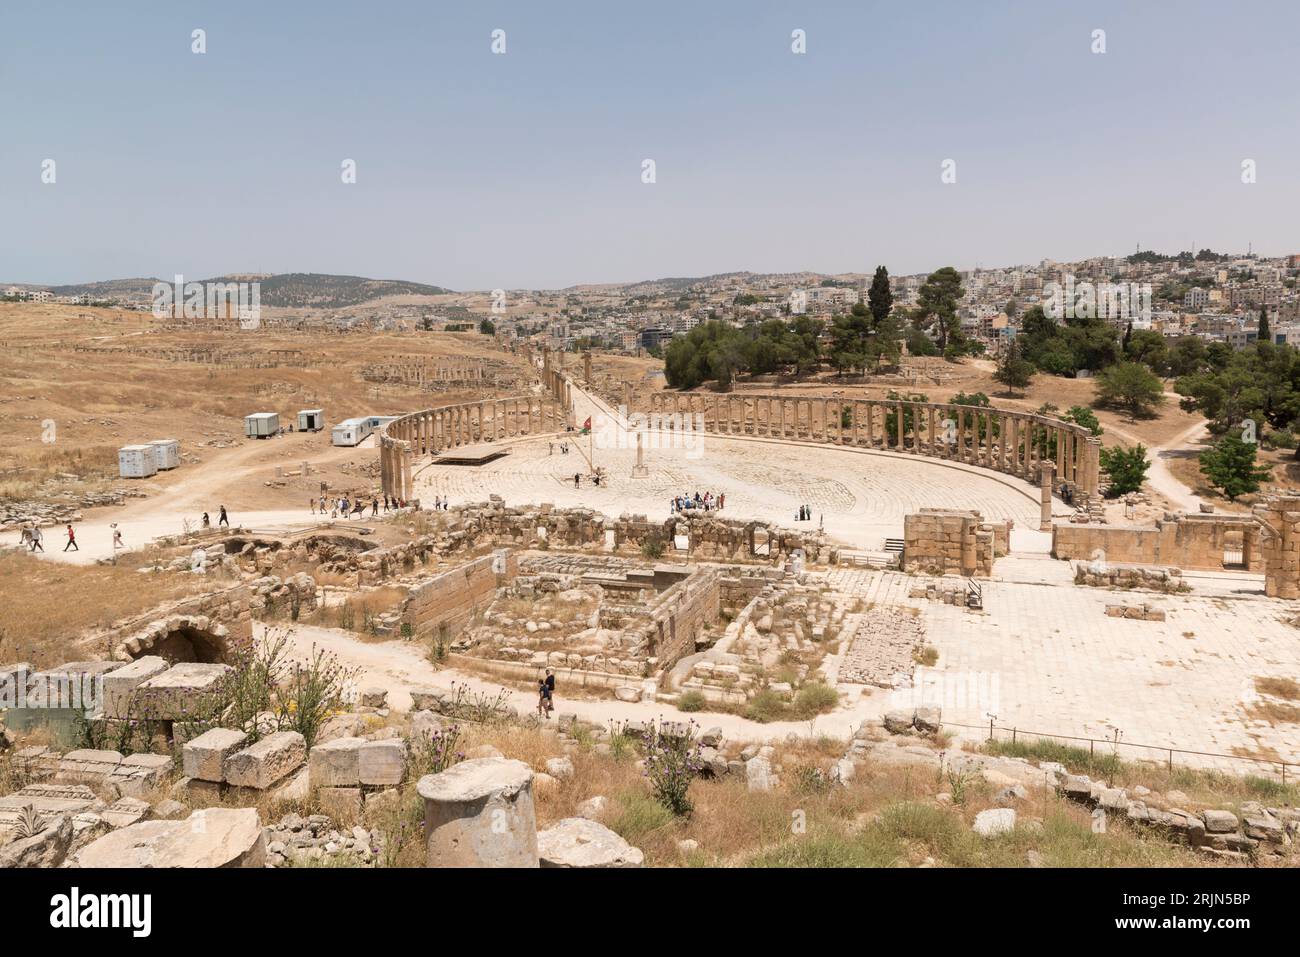 The Oval plaza, seen from the Temple of Zeus, in the ancient Greco-Roman city of Gerasa  in present day Jerash, Jerash Governorate, northern Jordan Stock Photo